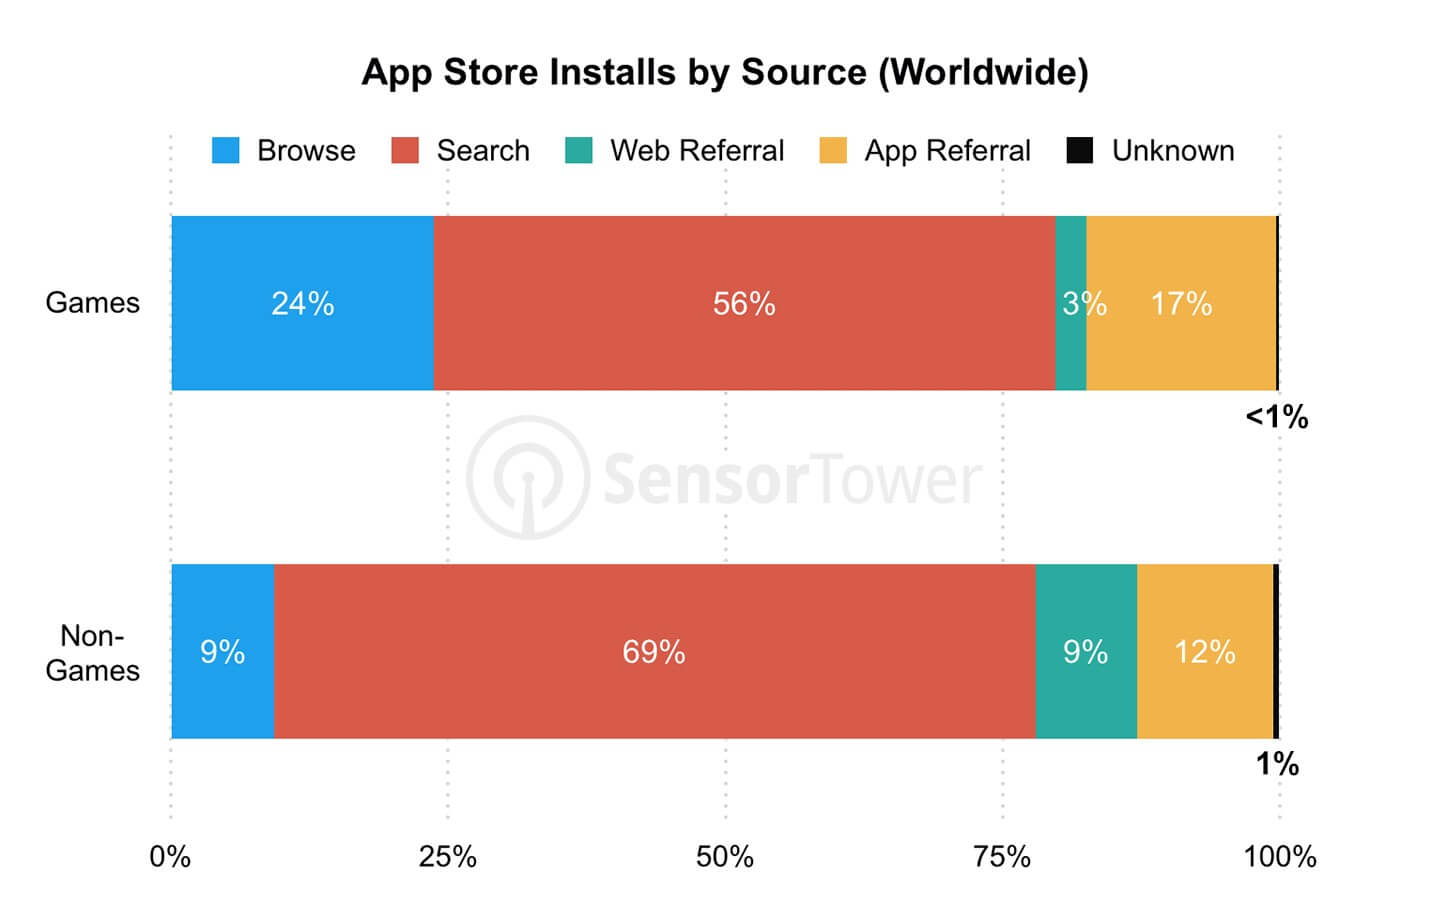 App Store Installs by Source